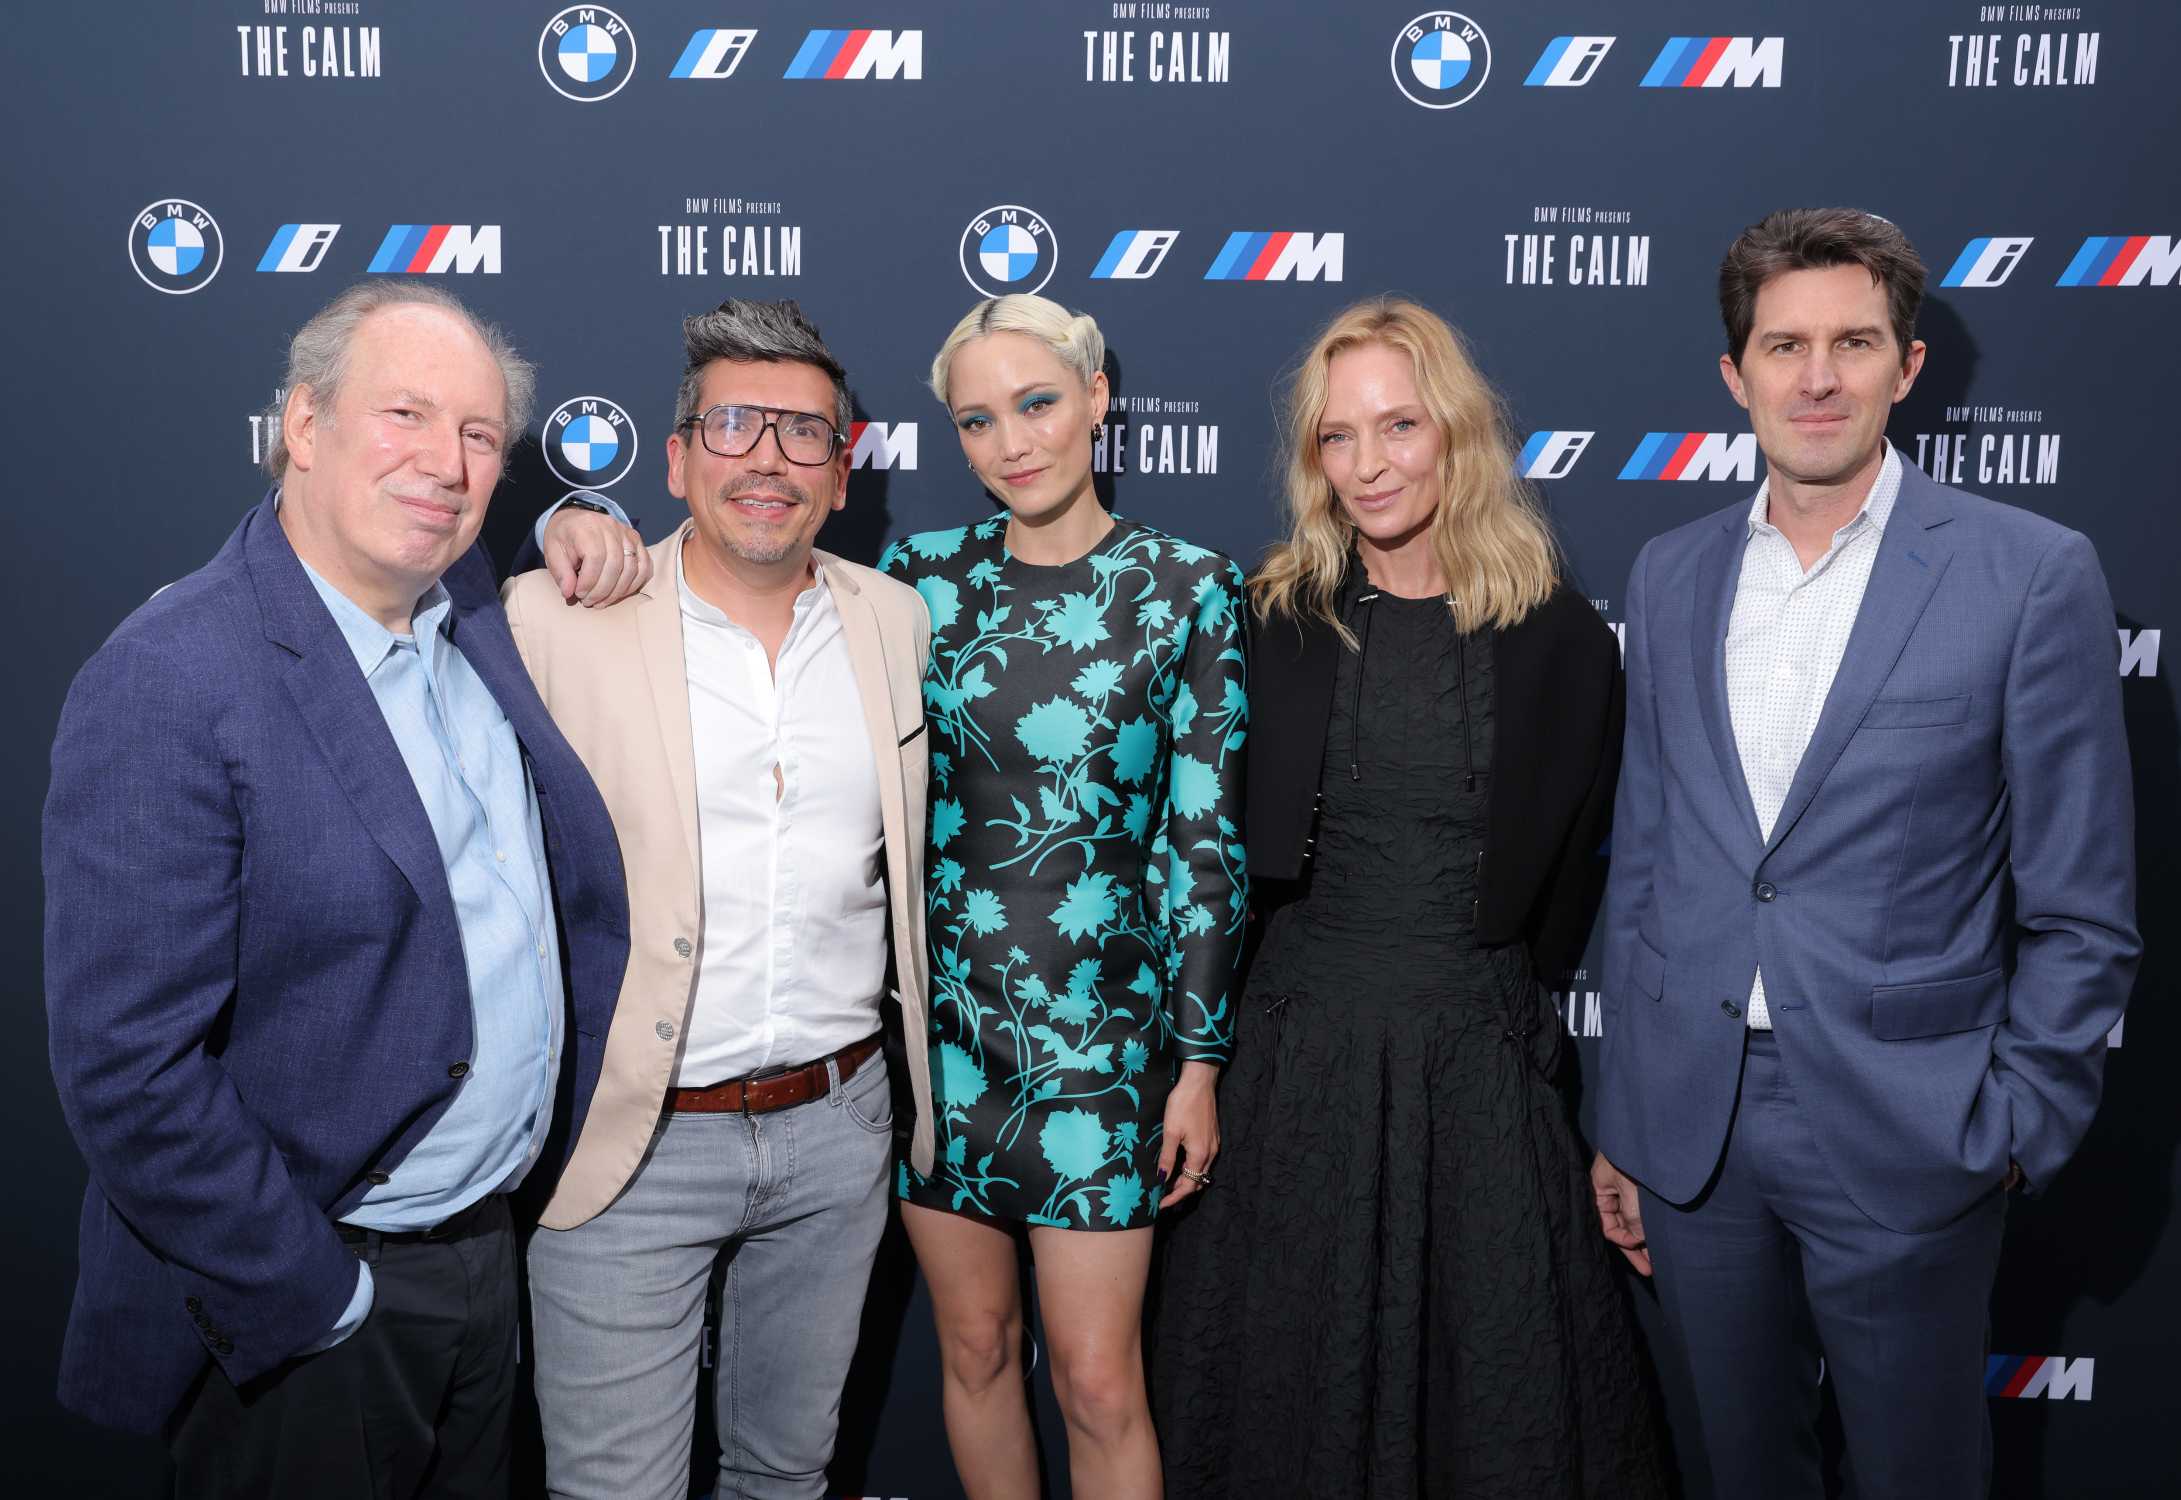 BMW thrills in Cannes with Hollywood action and a sustainable marine experience.